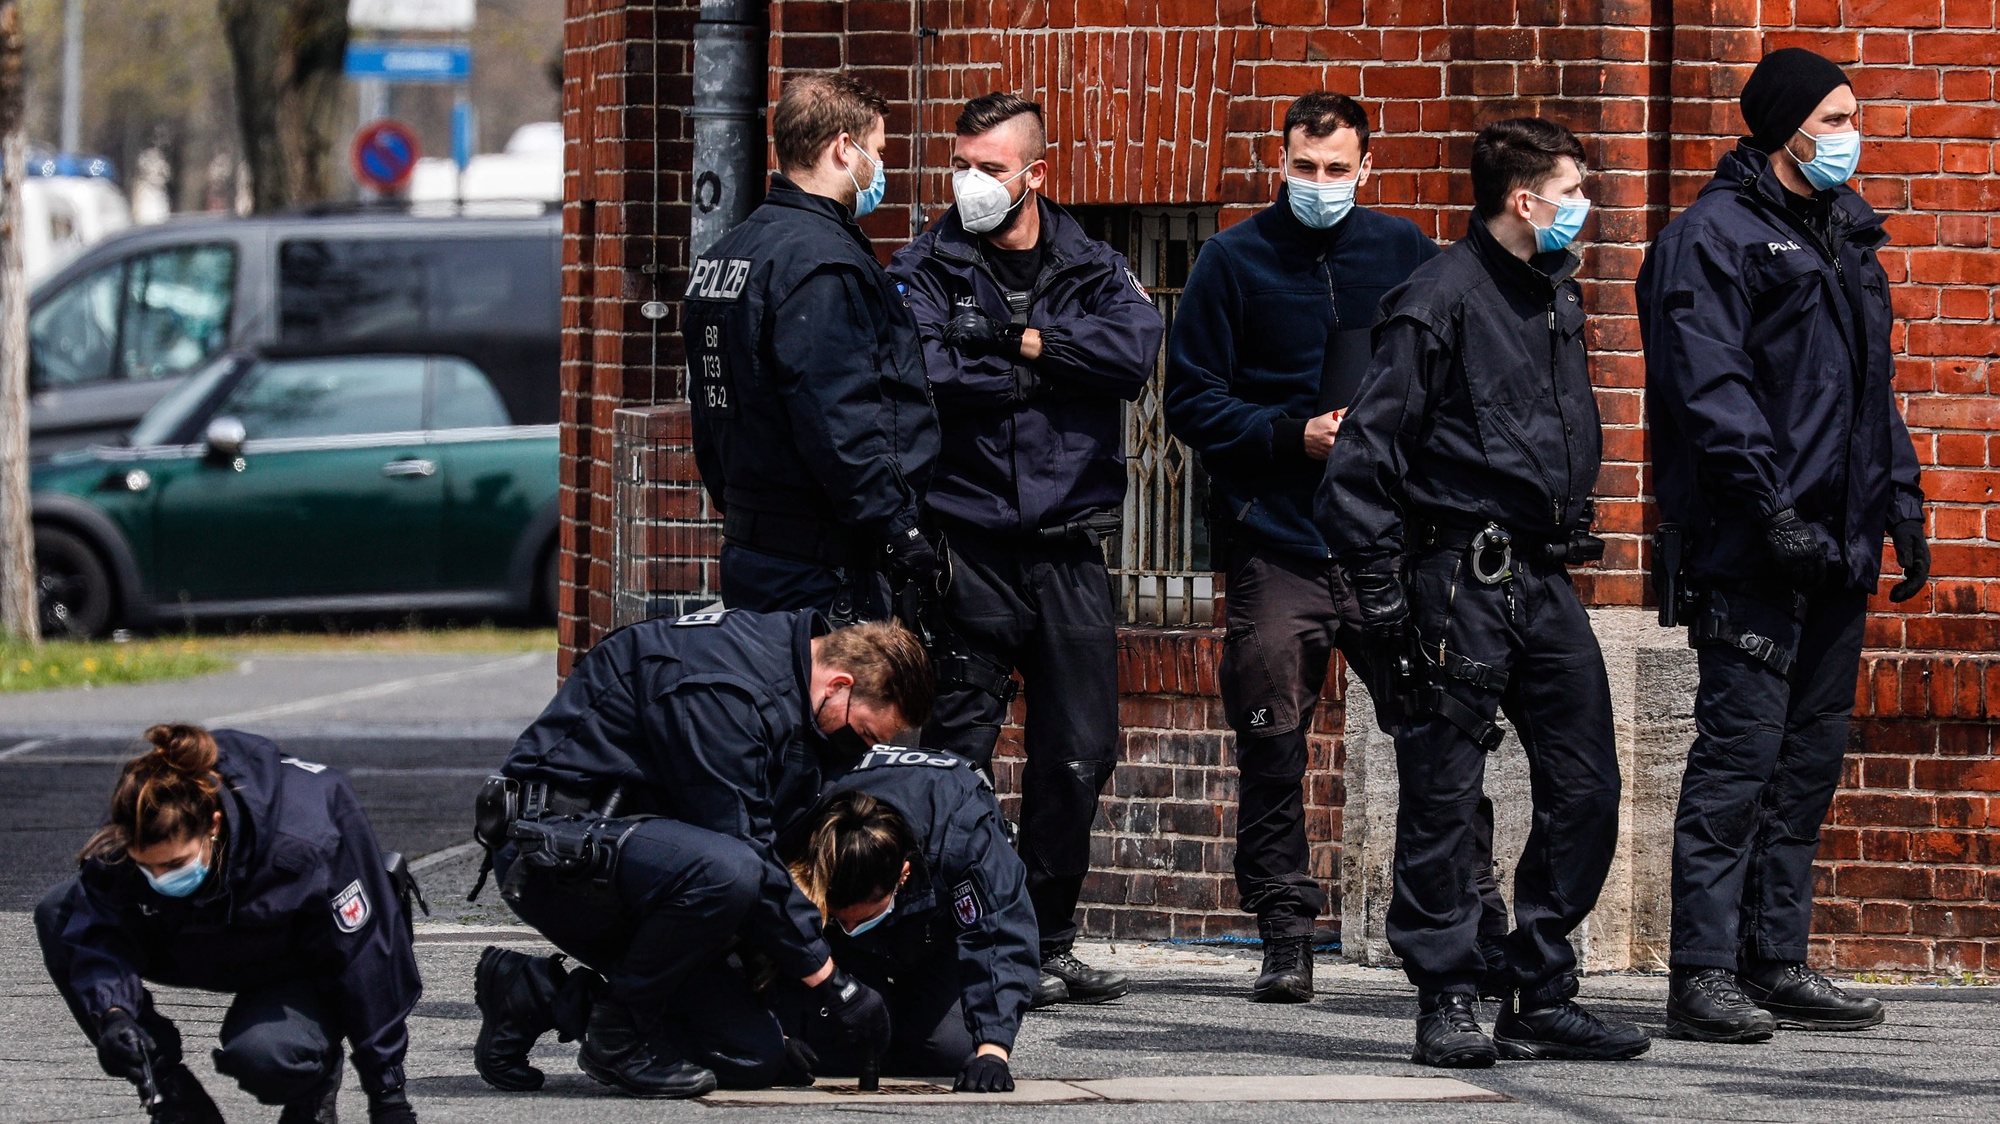 epa09167583 Police investigate in front of Oberlin care Clinic in Potsdam, Germany, 29 April 2021. German police arrested a woman on suspicion of killing four people on late evening of 28 April.  EPA/FILIP SINGER